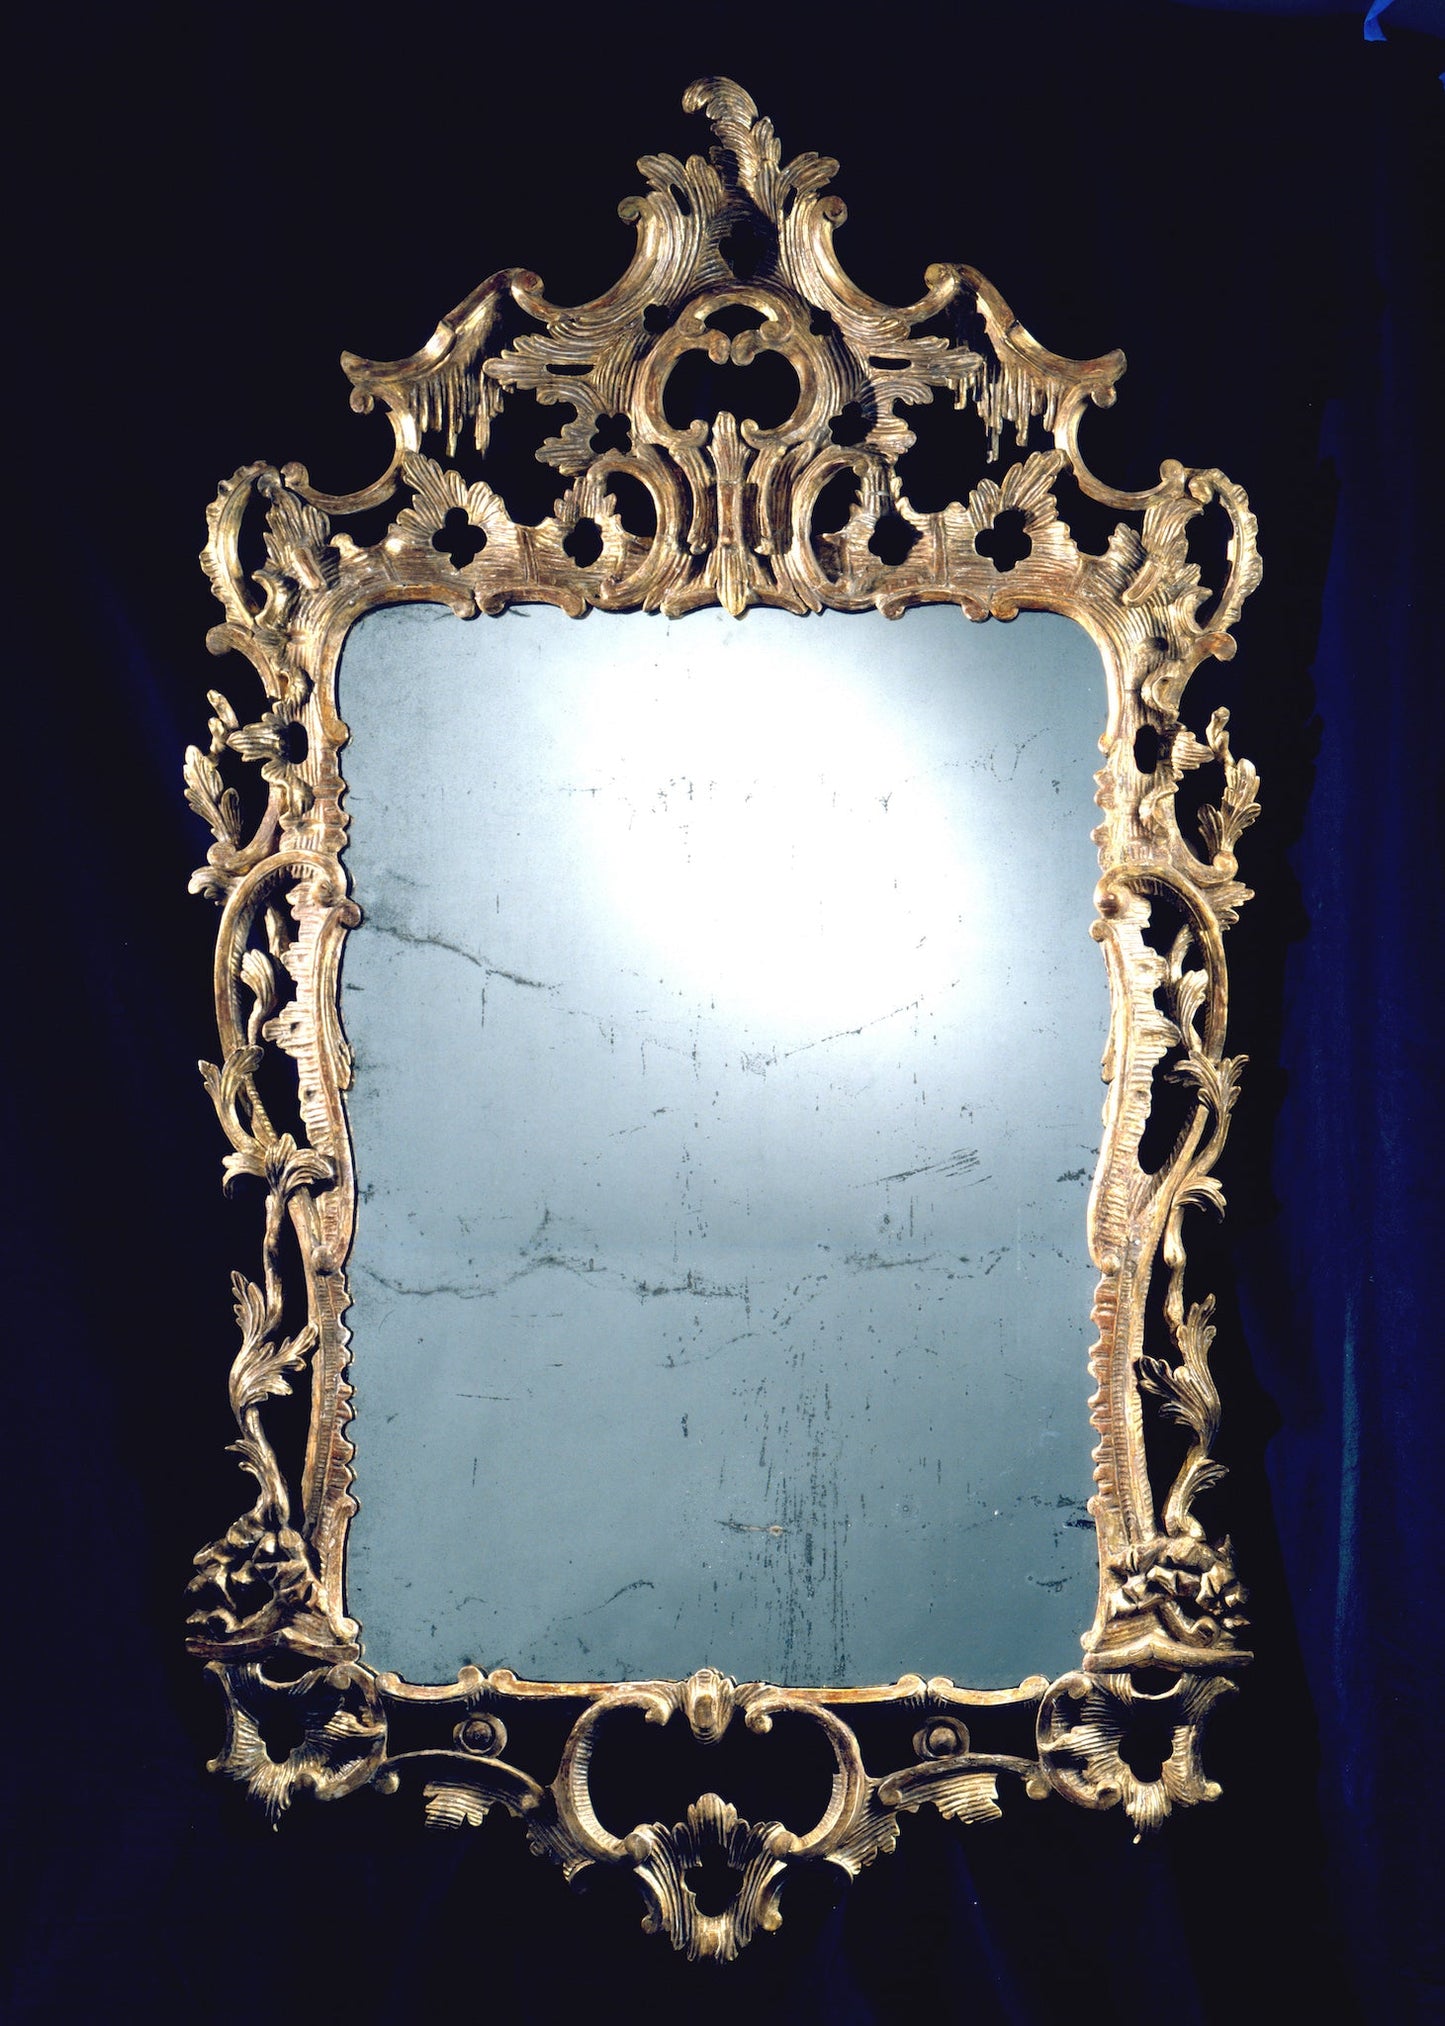 Carved-and-Gilded-Baroque/Rococo-Looking-Glass